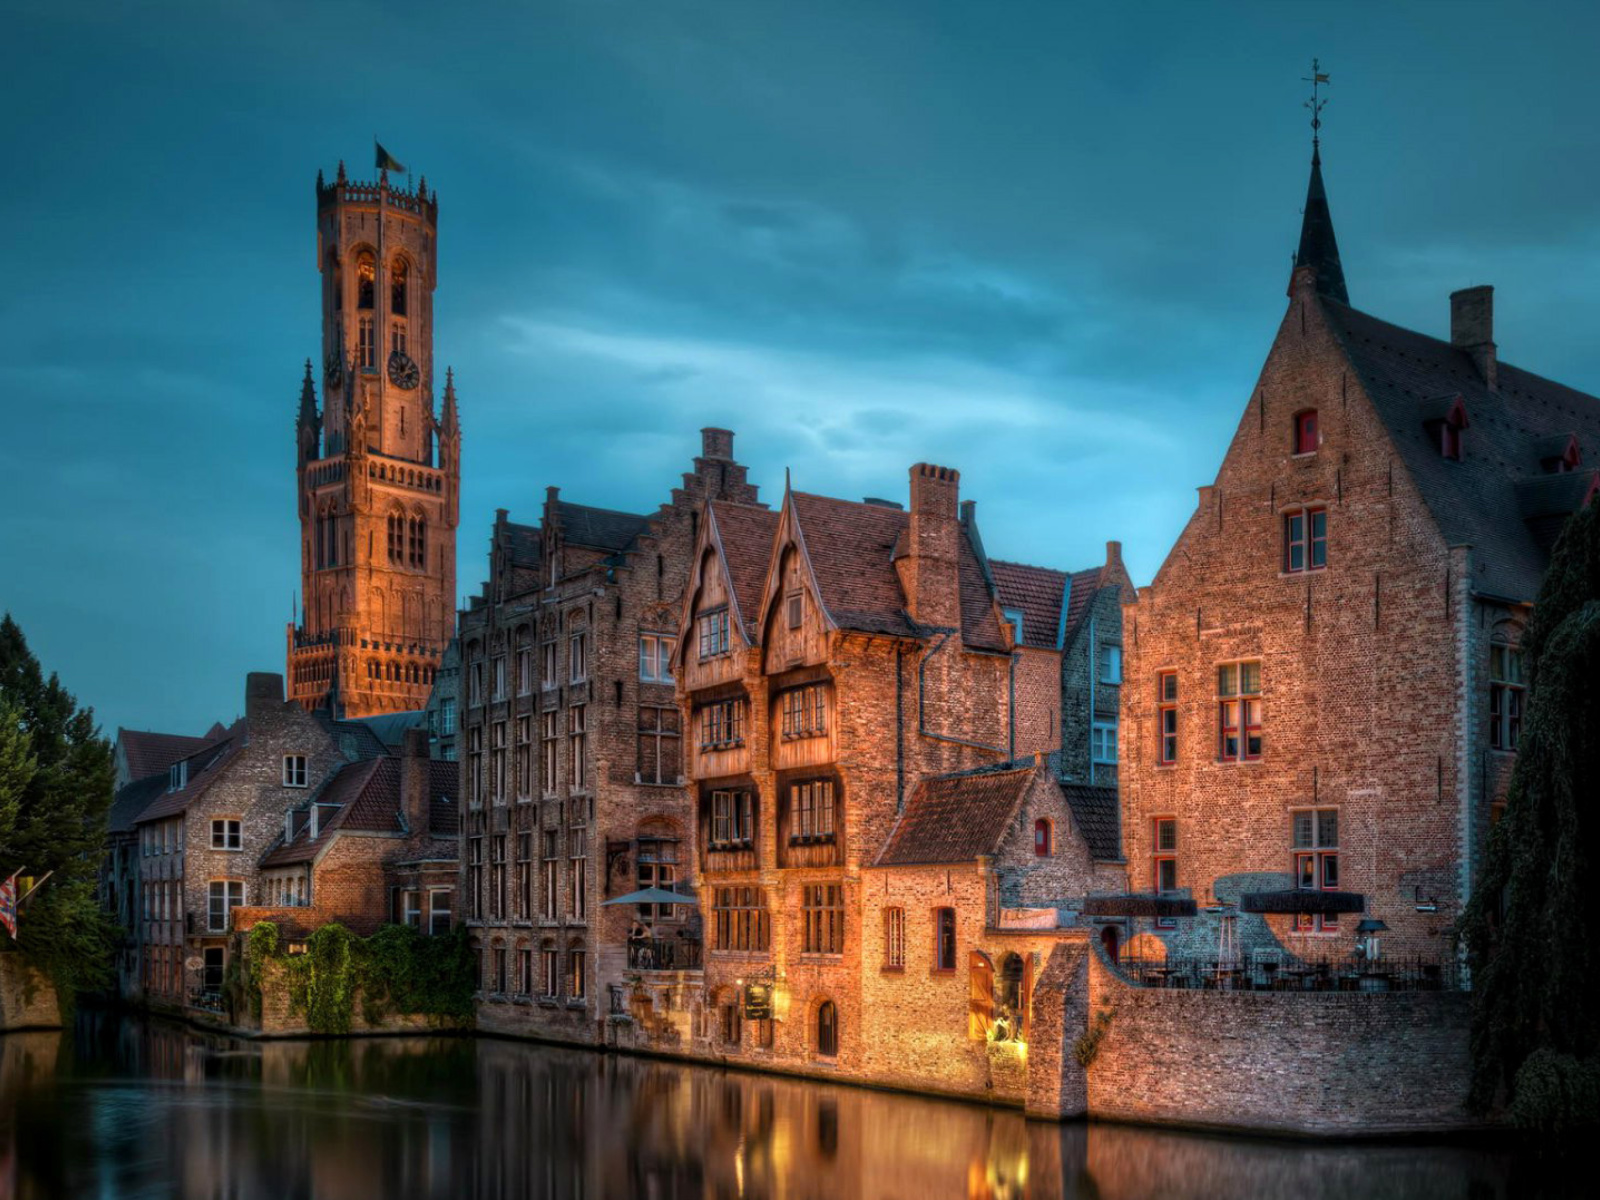 Das Bruges city on canal Wallpaper 1600x1200